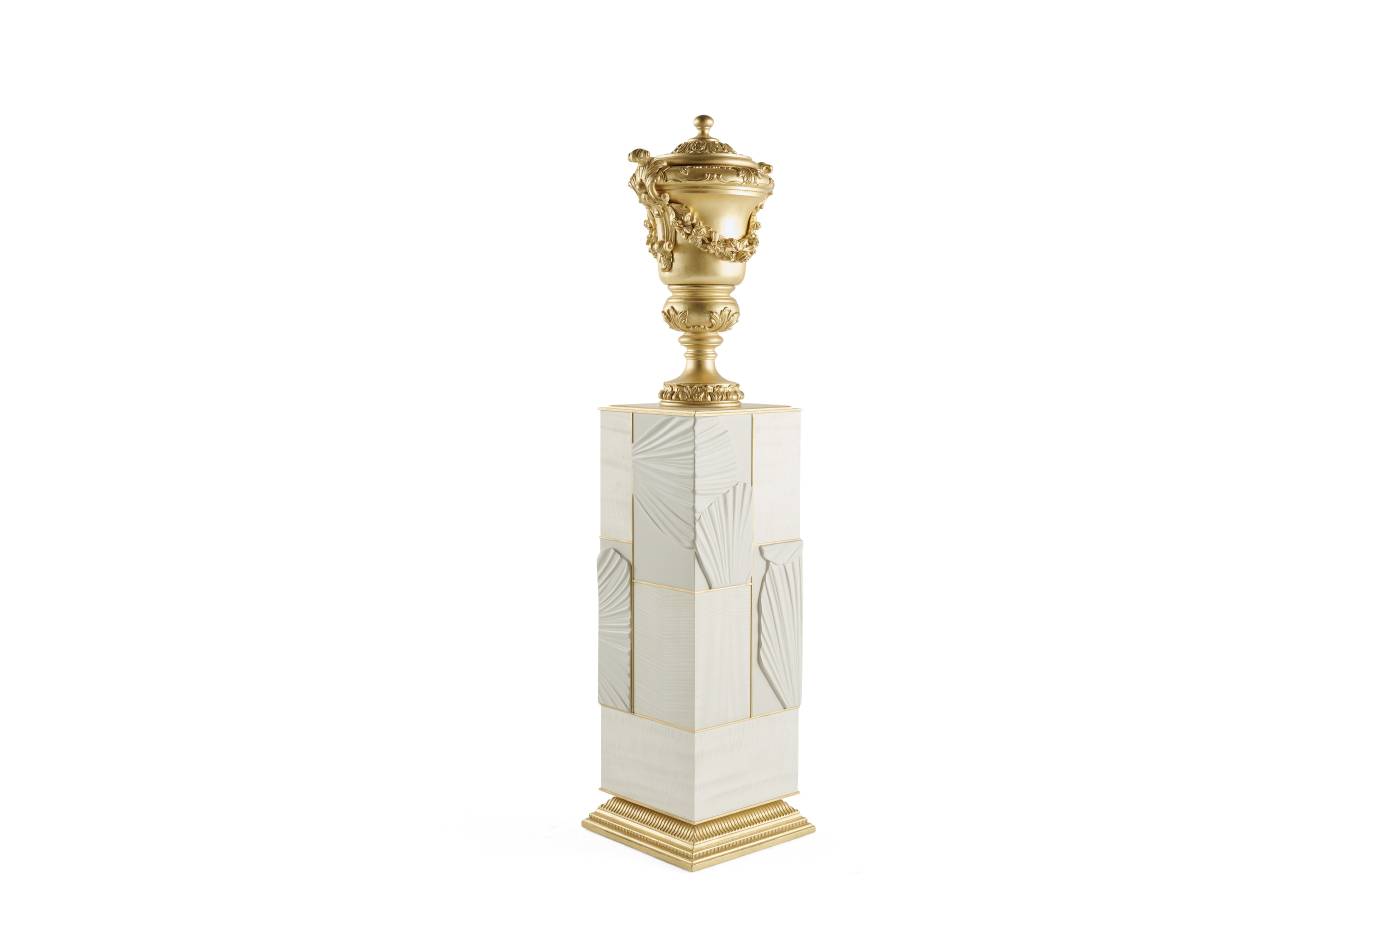 NÉNUPHAR vase holder - quality furniture and timeless elegance with luxury Made in Italy classic decorative elements of Héritage collection.